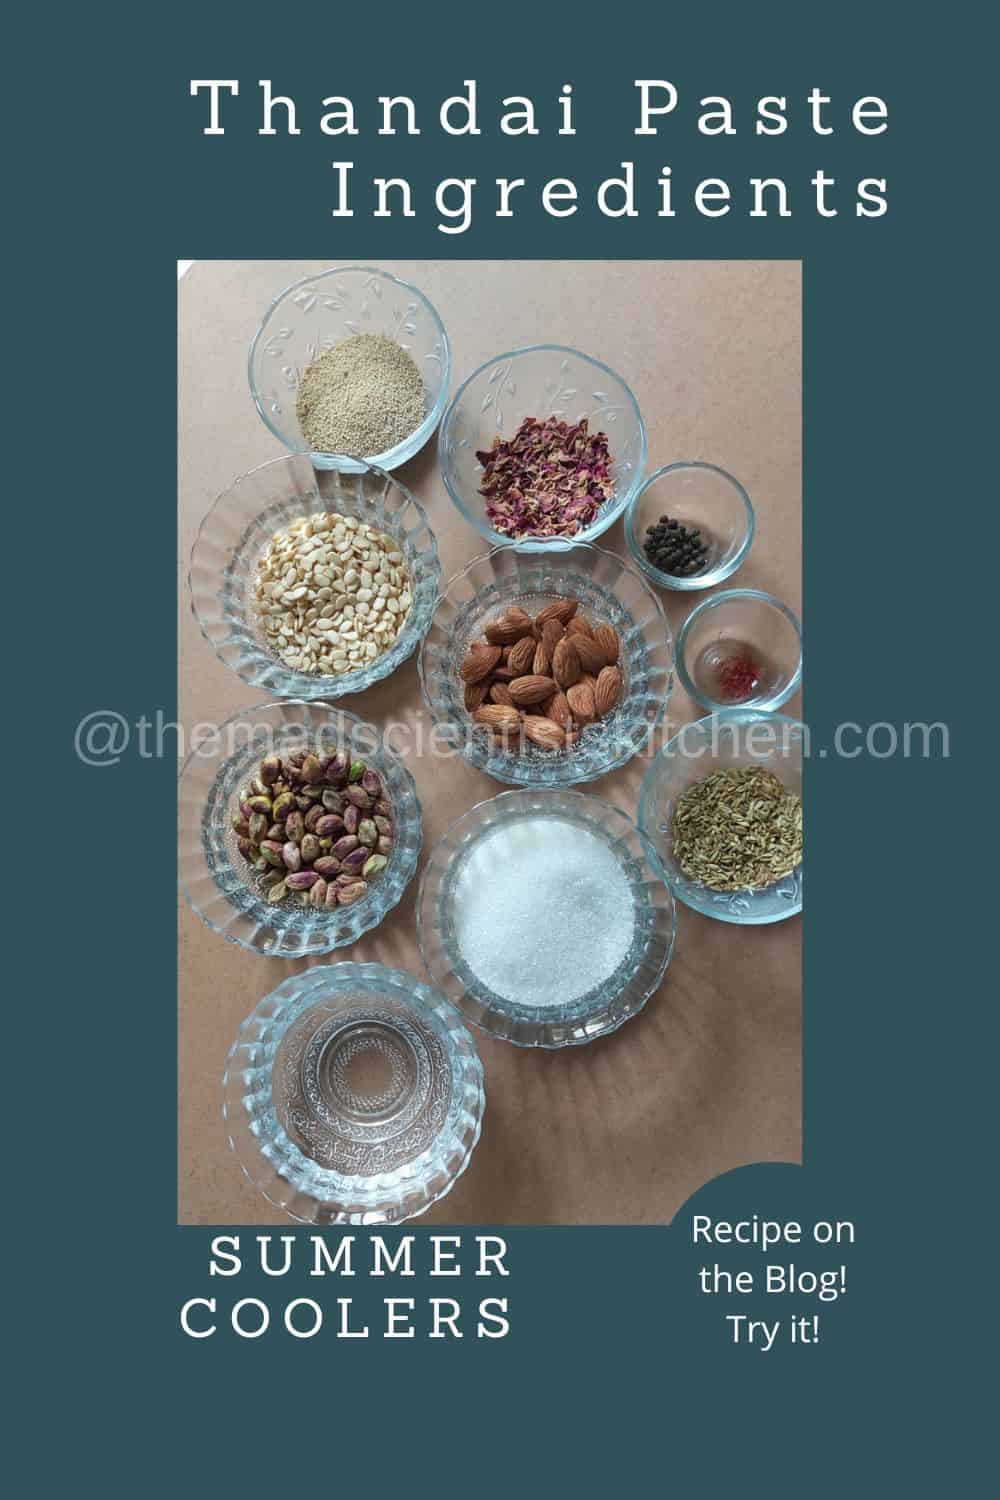 Thandai Paste Ingredients are all ready for soaking